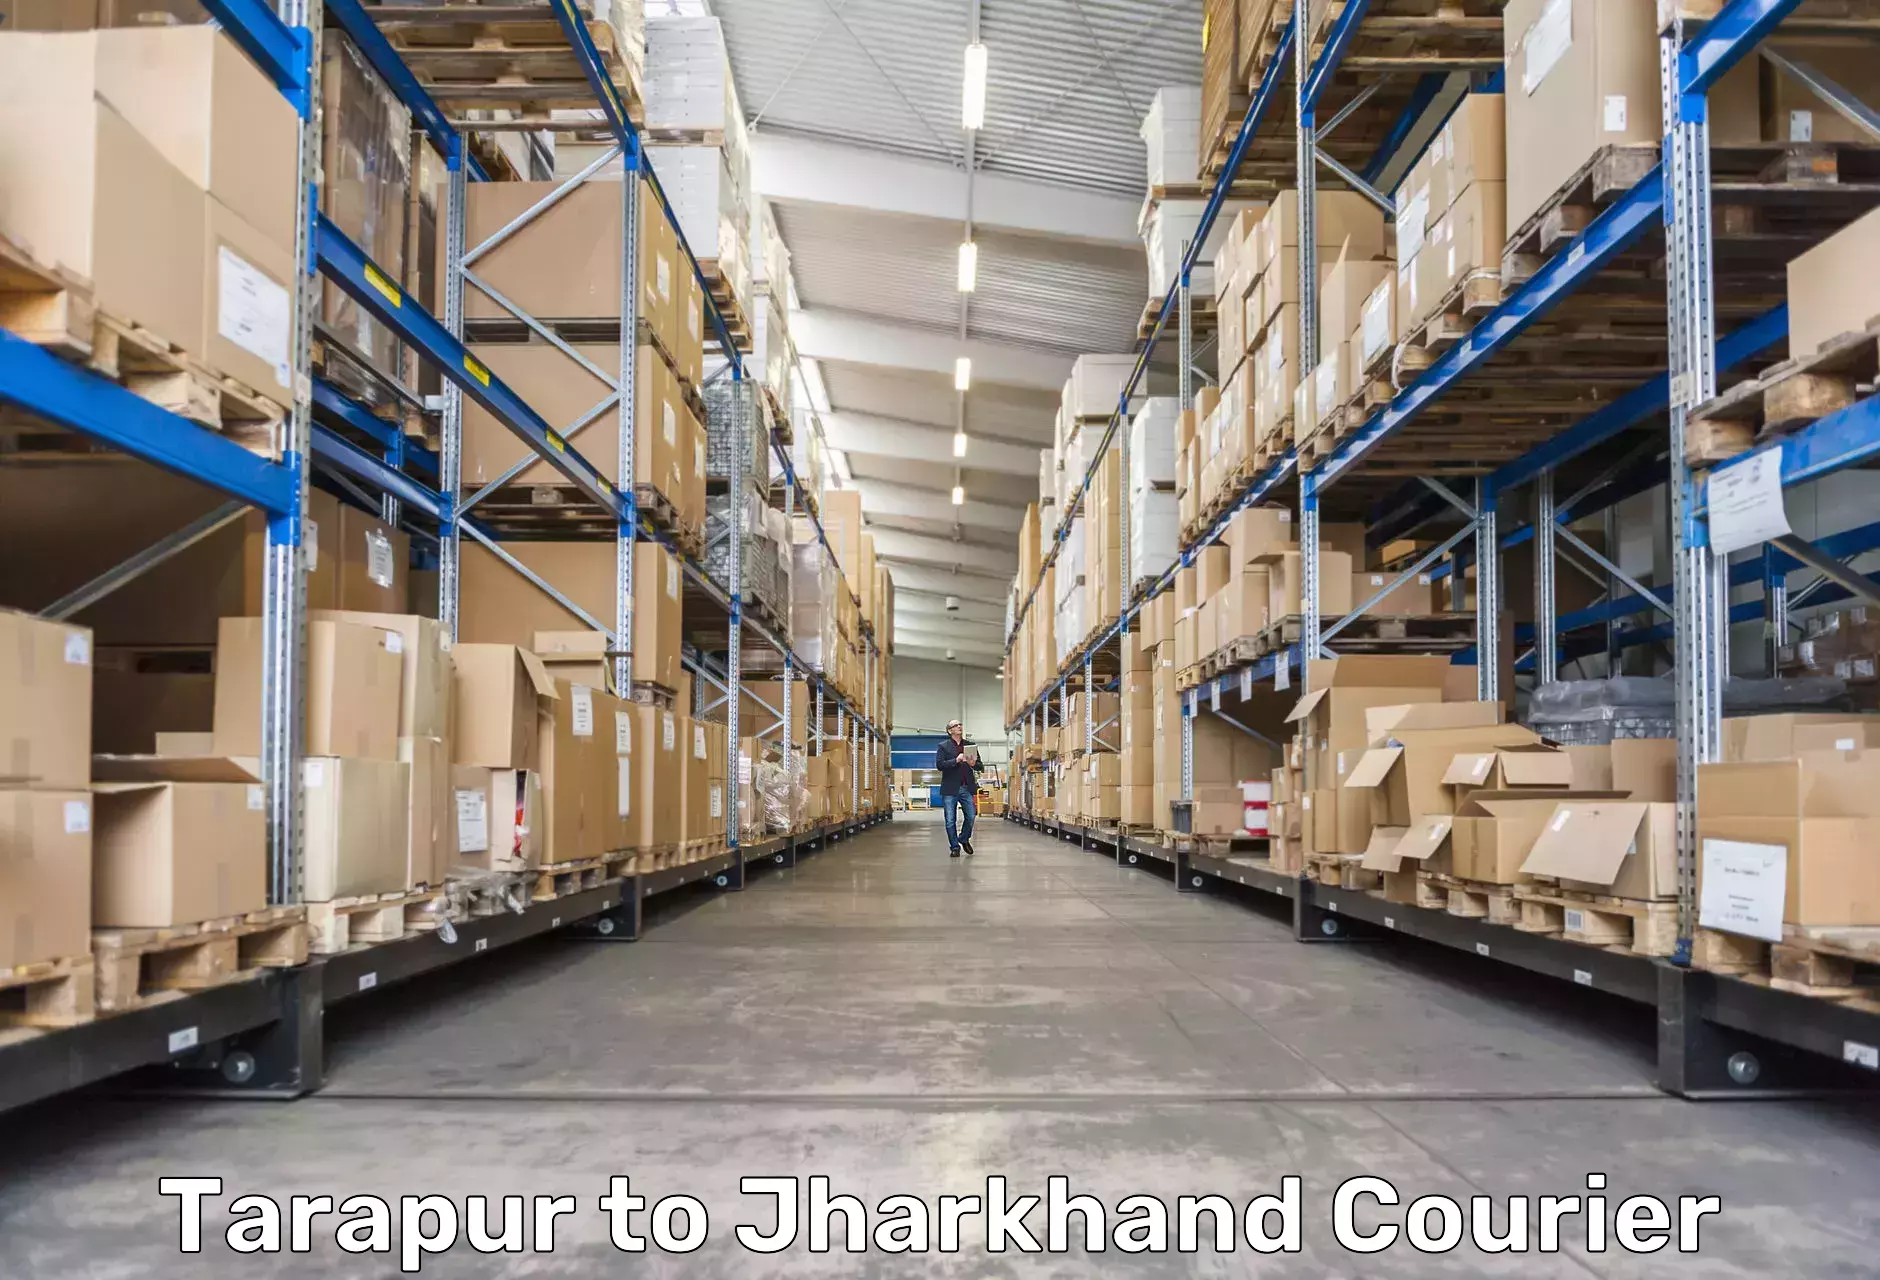 Courier service booking Tarapur to Jharkhand